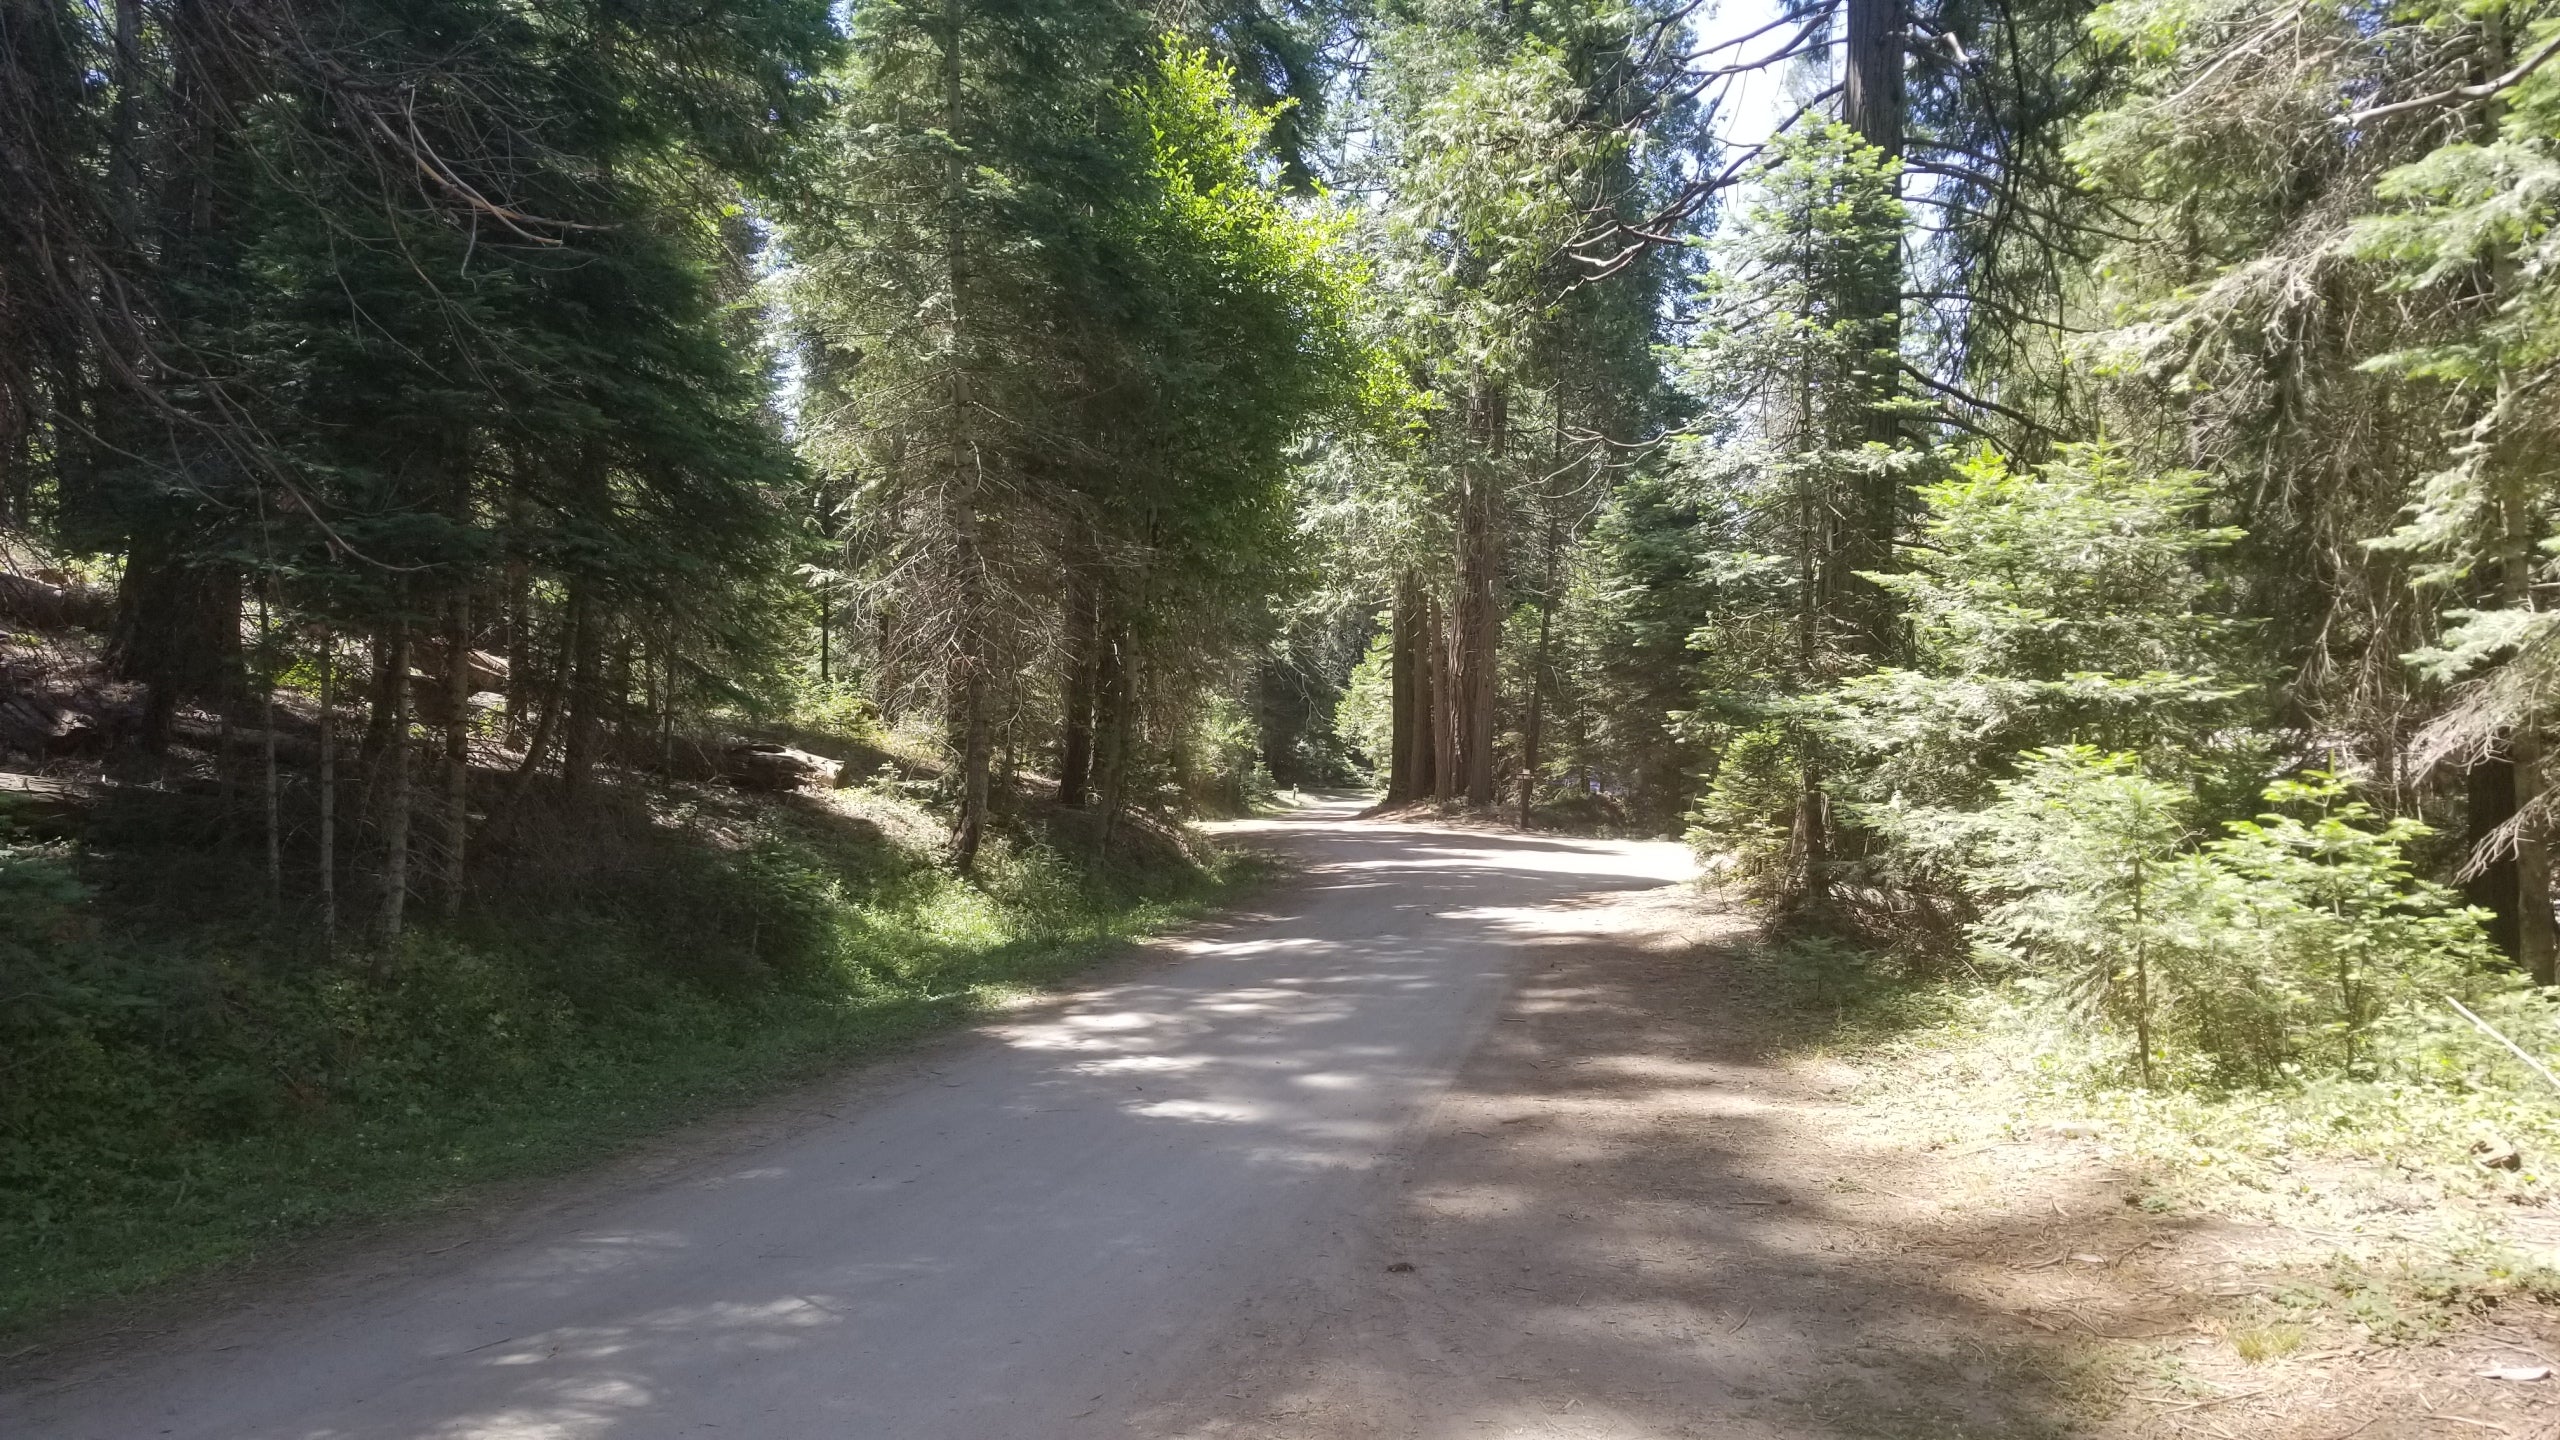 Road inside the campground